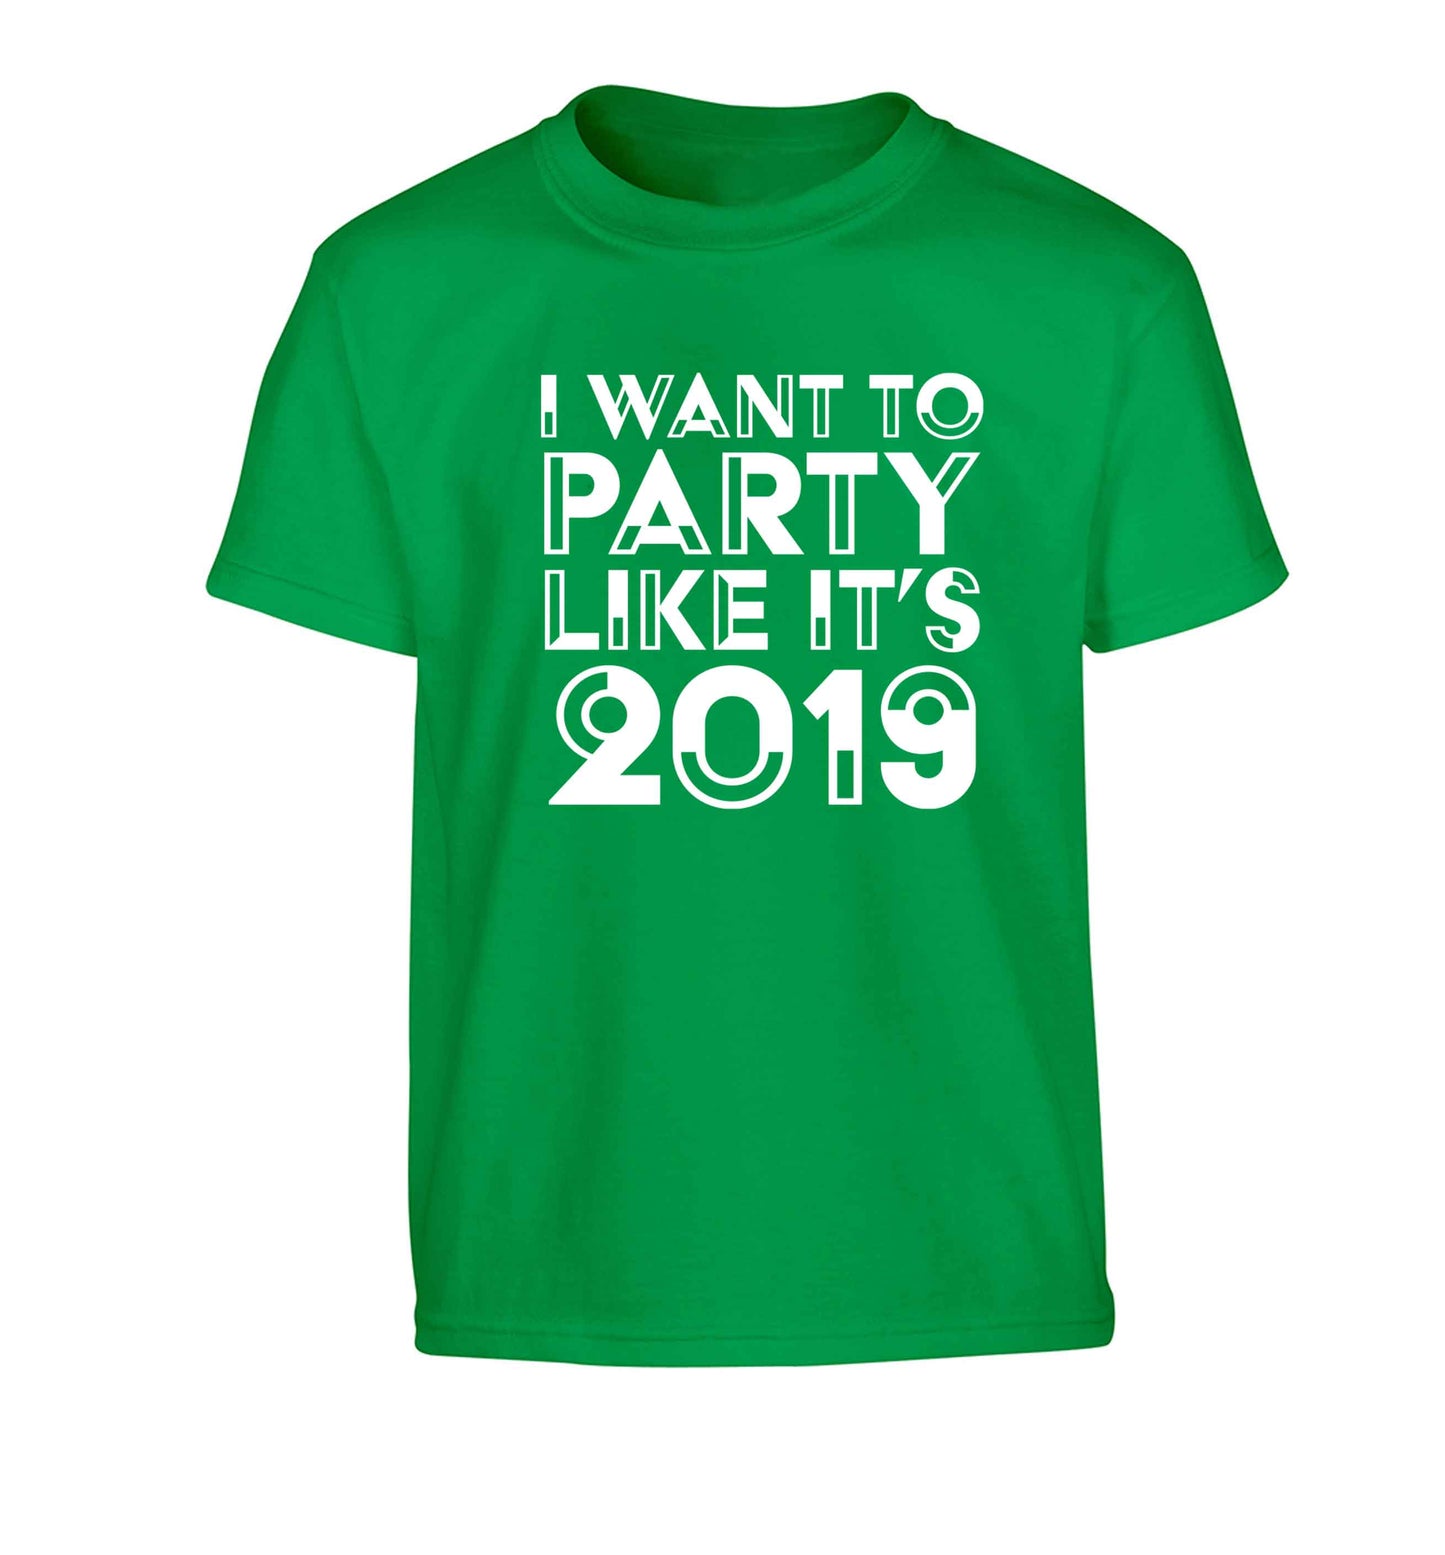 I want to party like it's 2019 Children's green Tshirt 12-13 Years